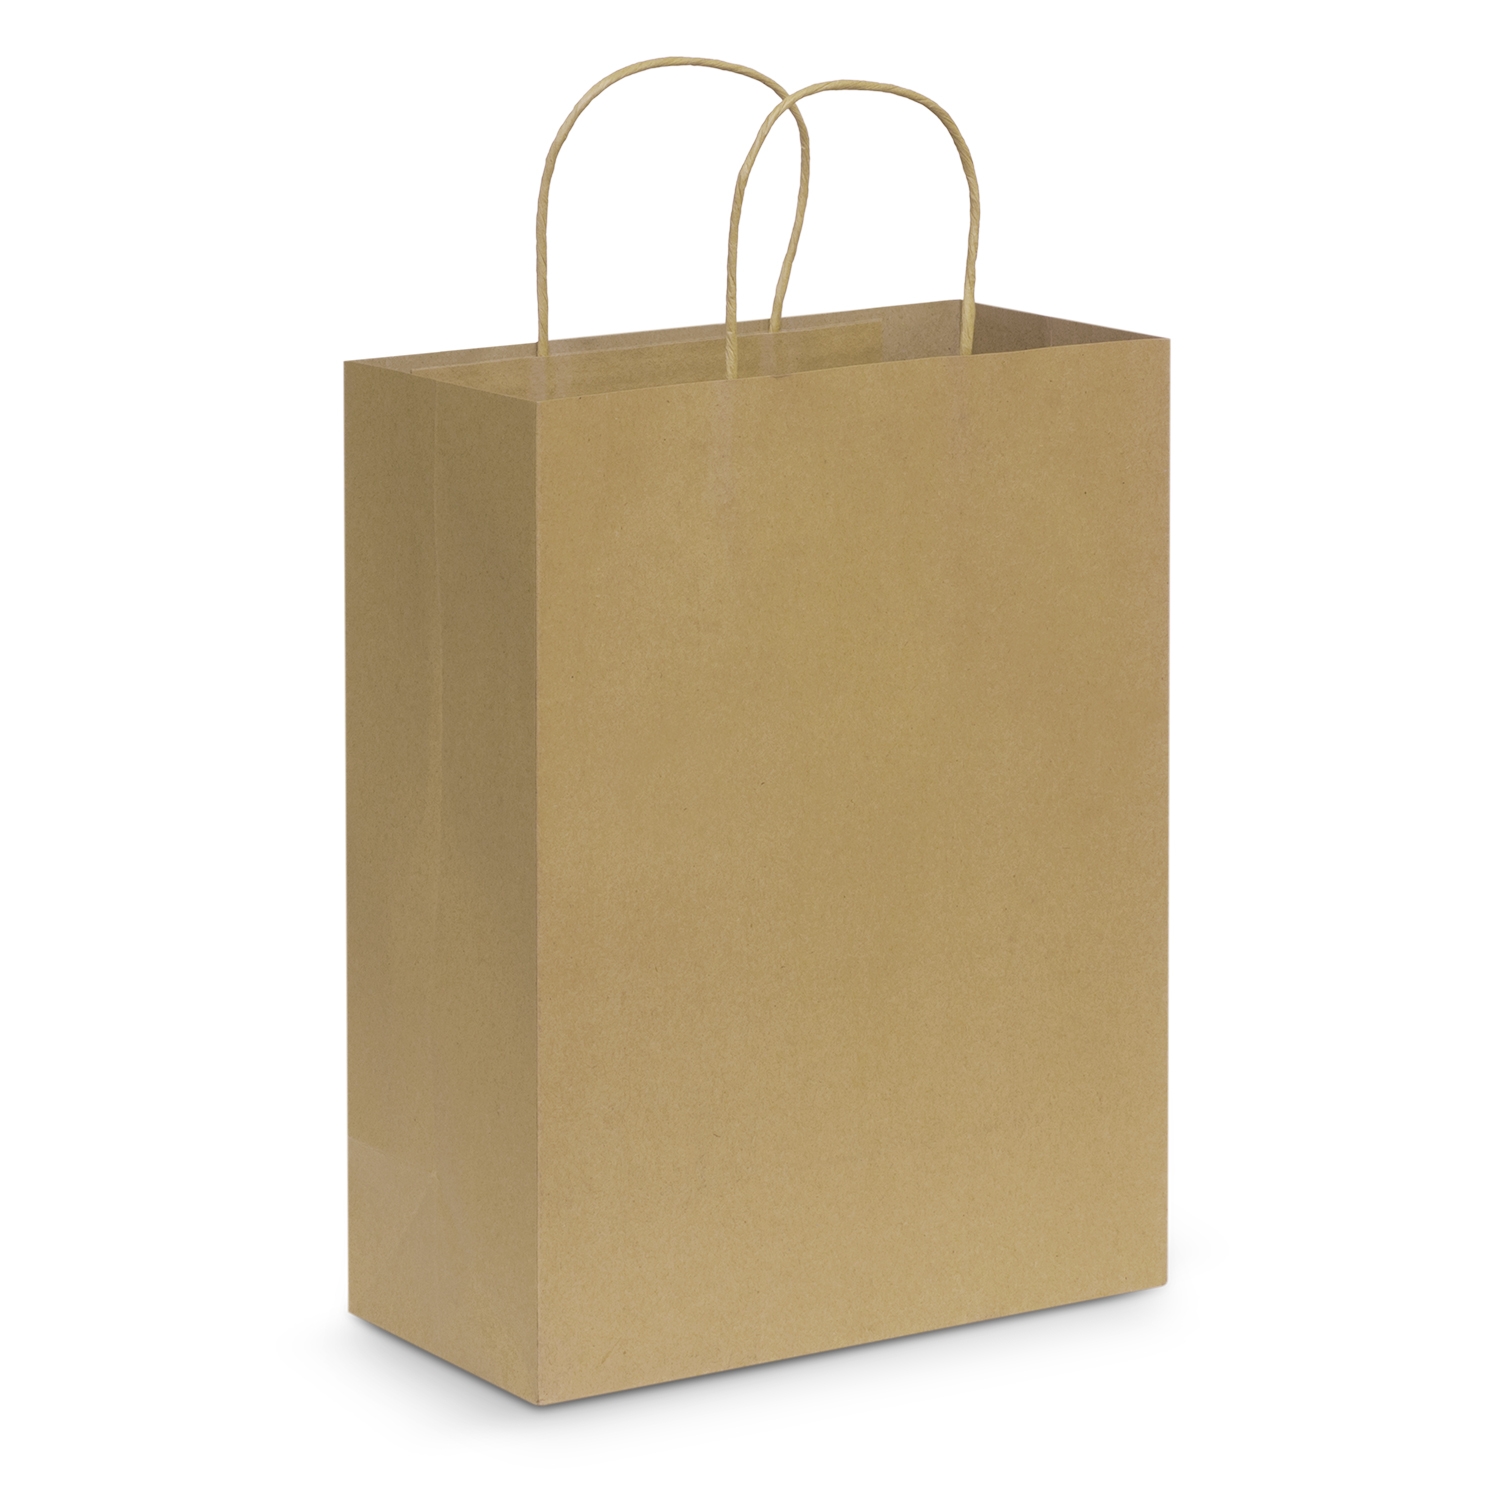 Large Paper Carry Bag 